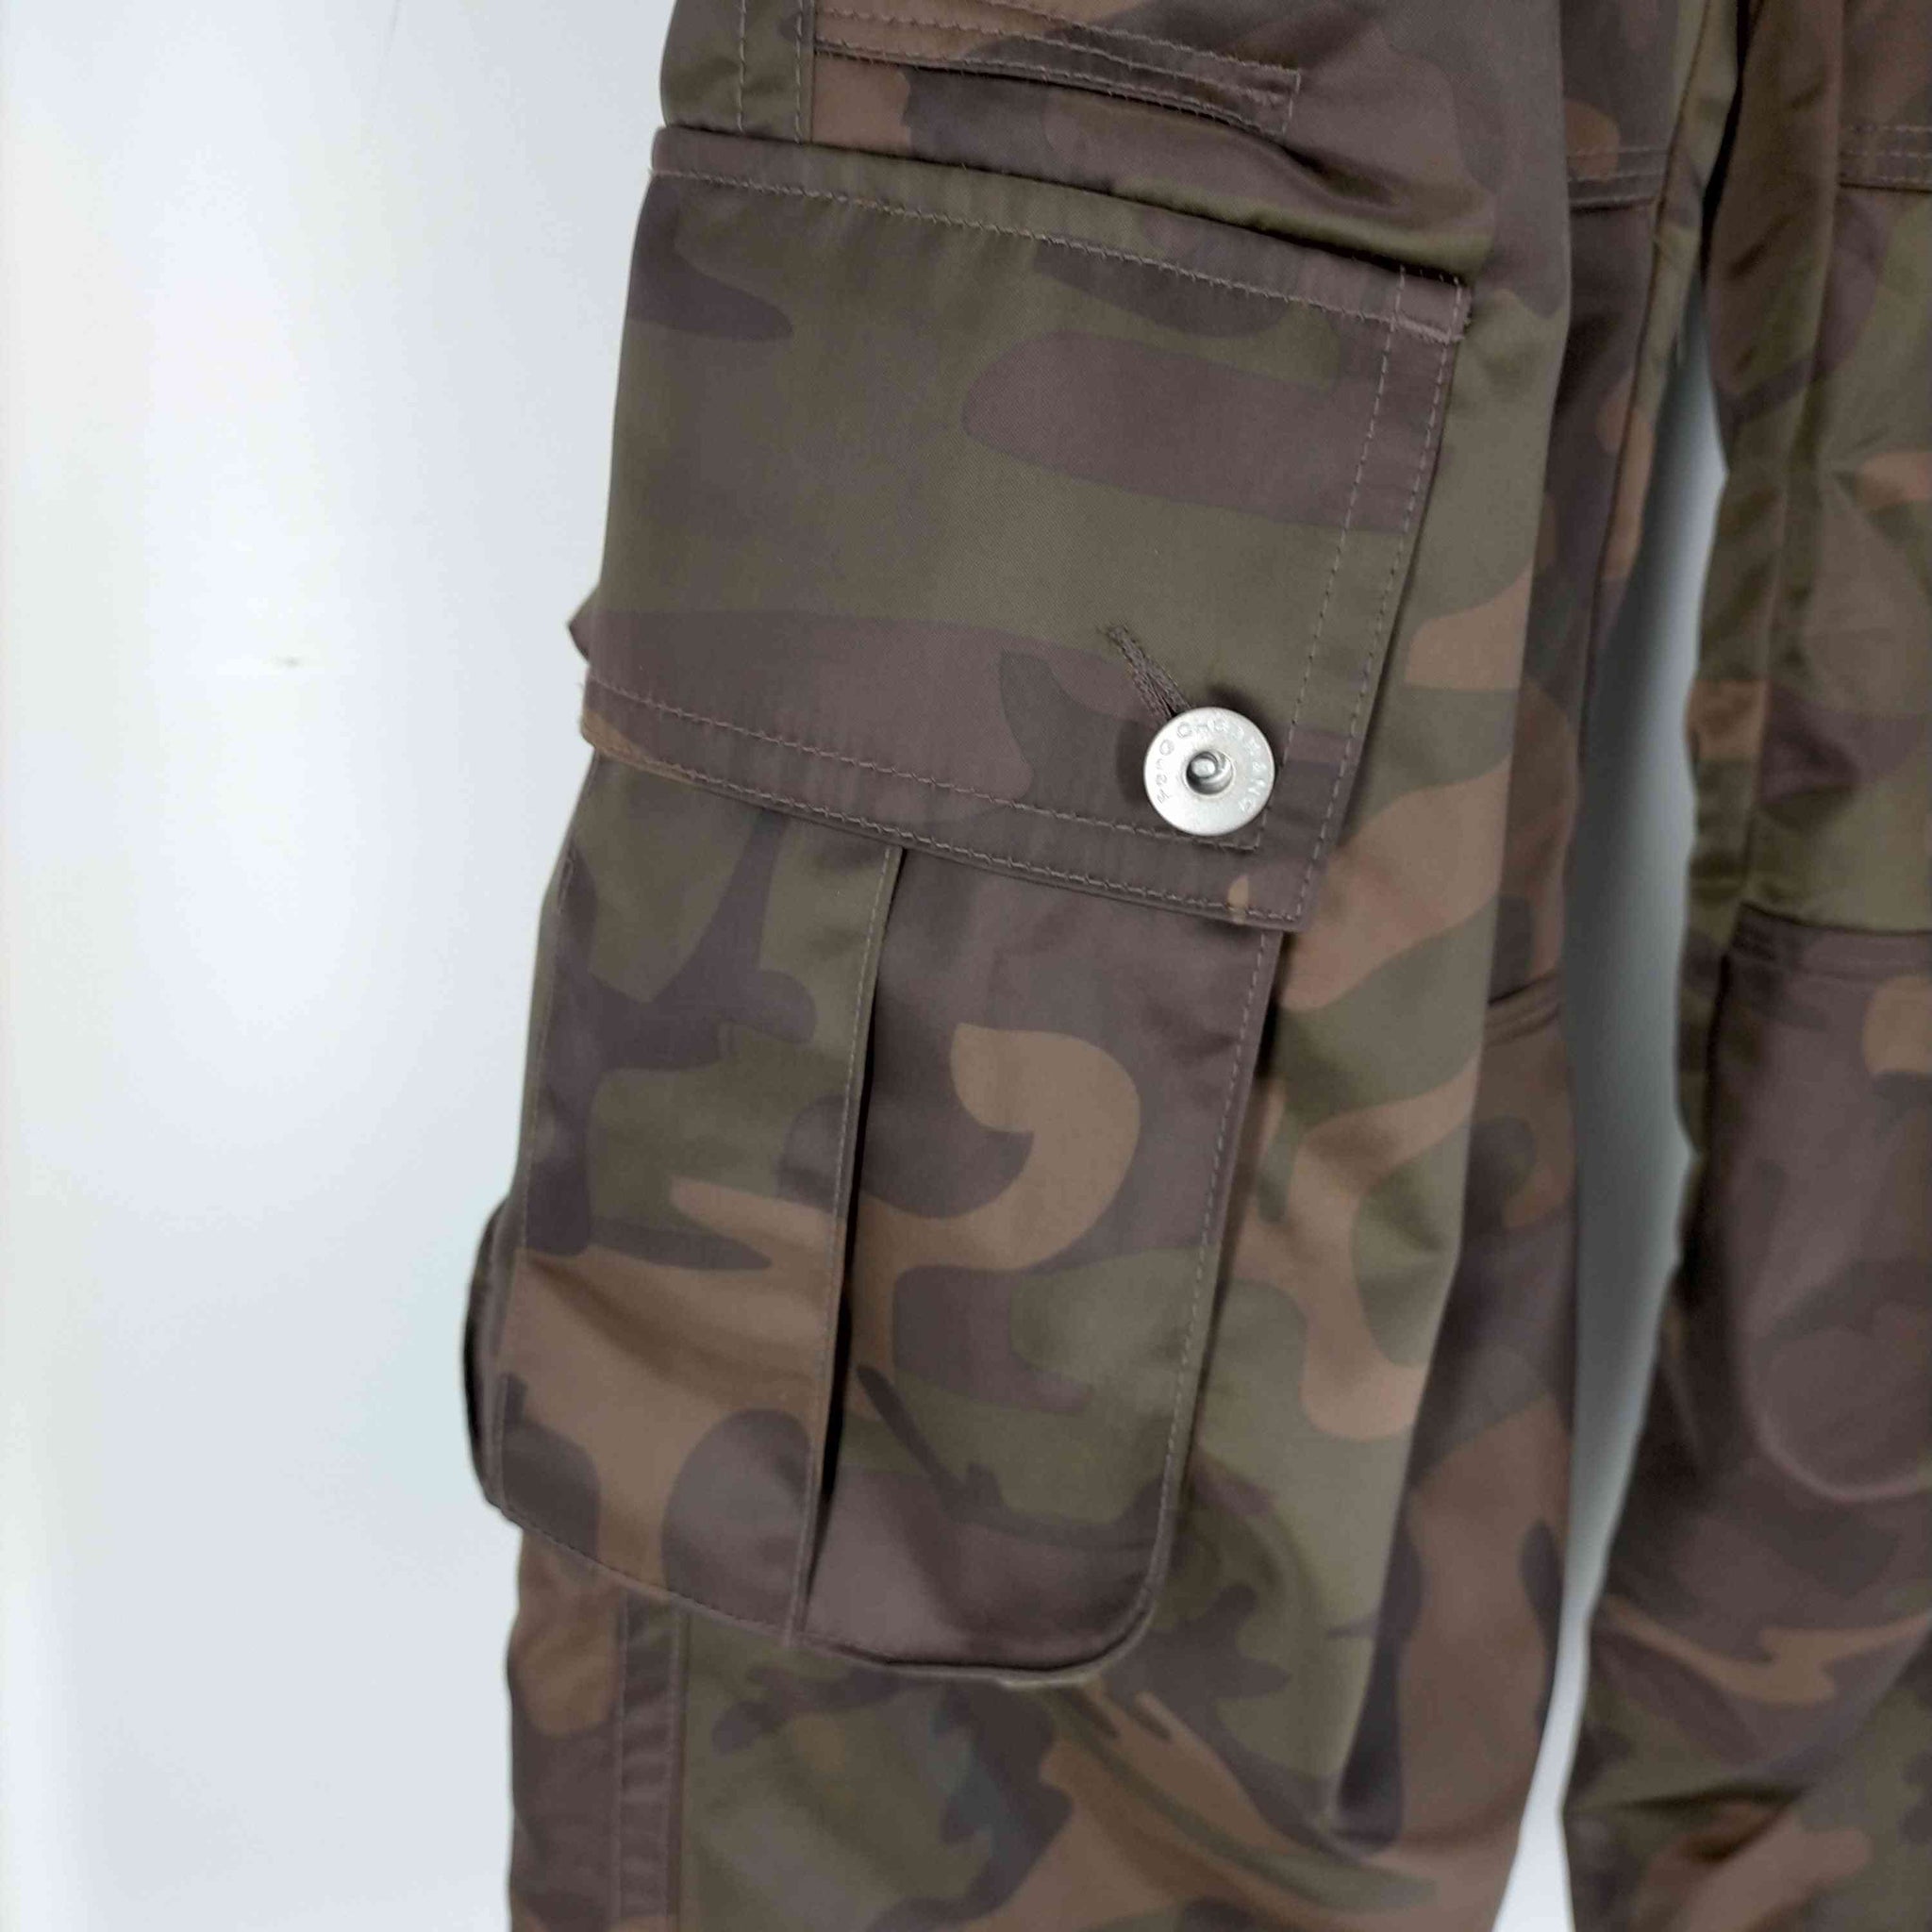 Feng Chen Wang(フェンチェンワン)camouflage cargo trousers